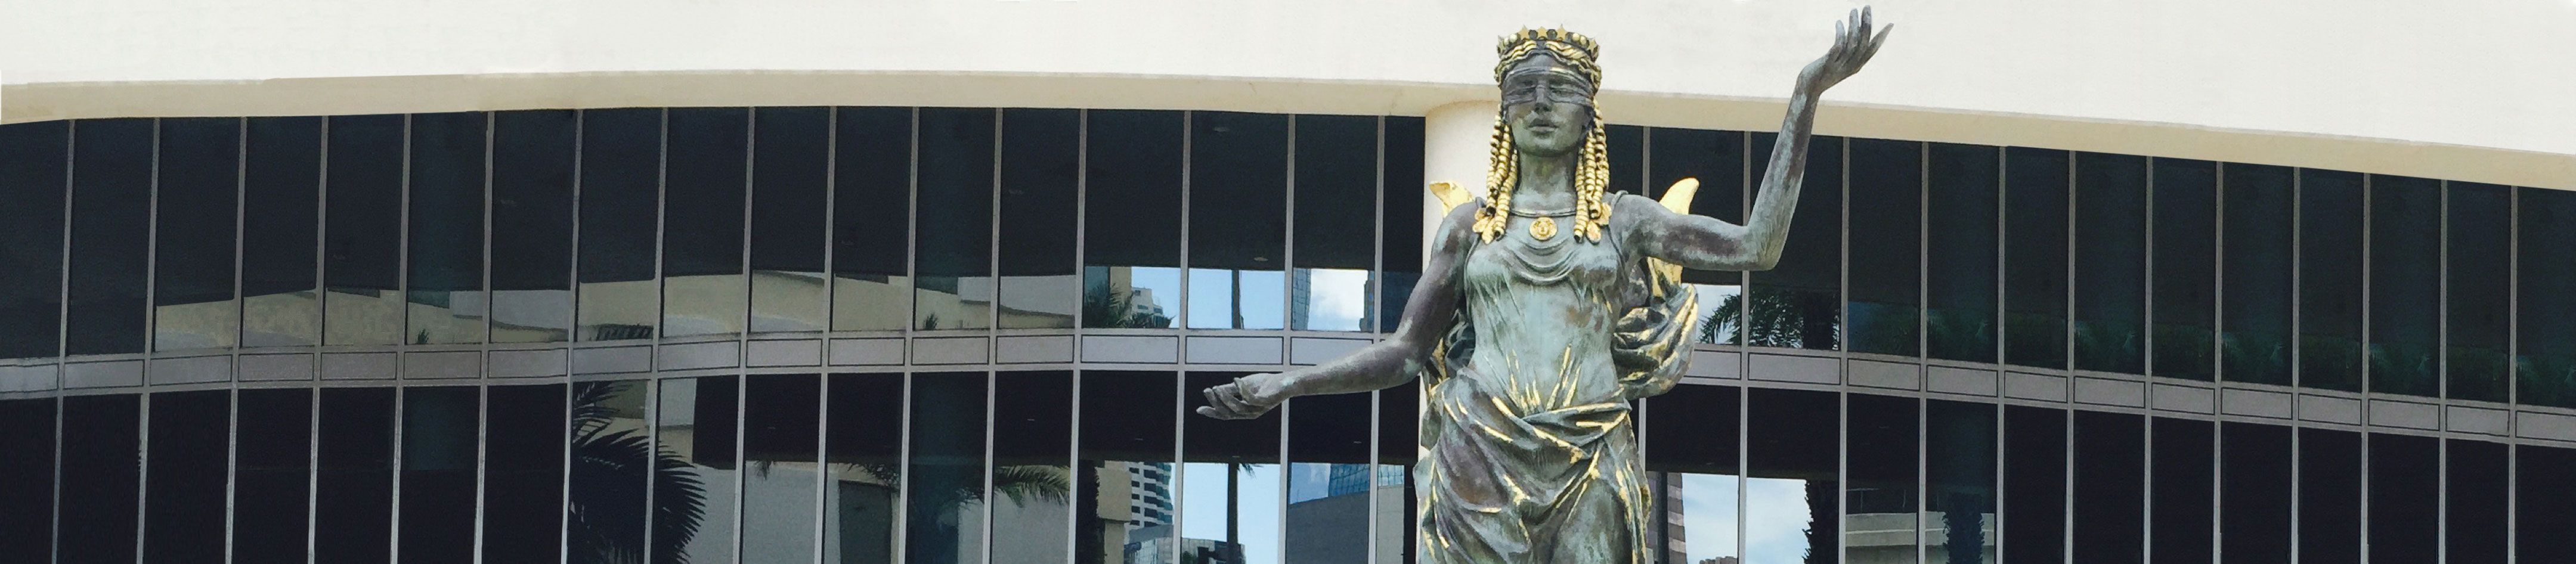 Lade Justice (the statue in front of the 13th Judicial Circuit Courthouse)